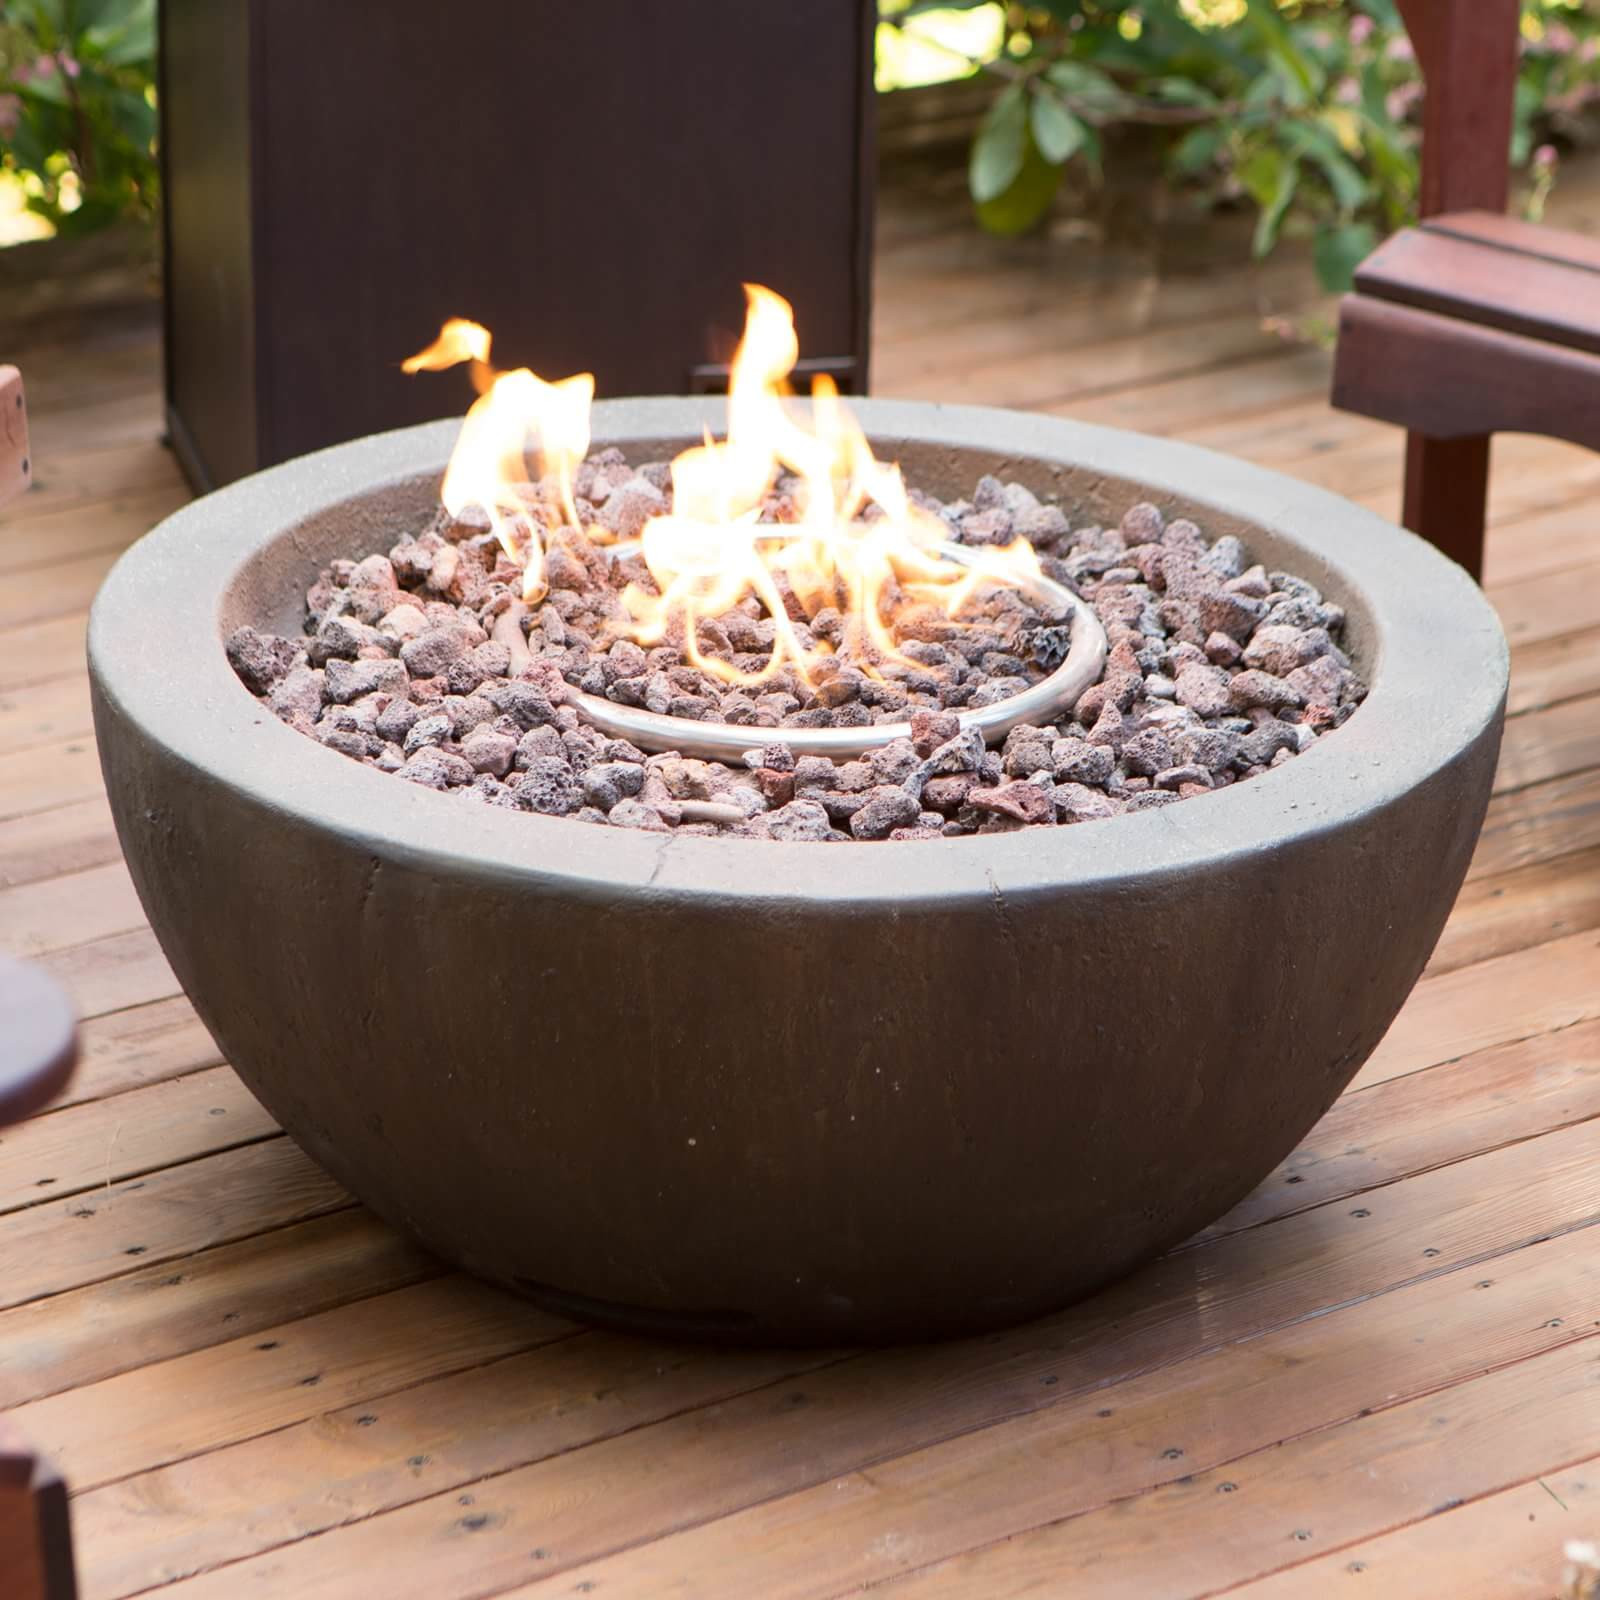 DIY Outdoor Gas Fire Pit
 42 Backyard and Patio Fire Pit Ideas